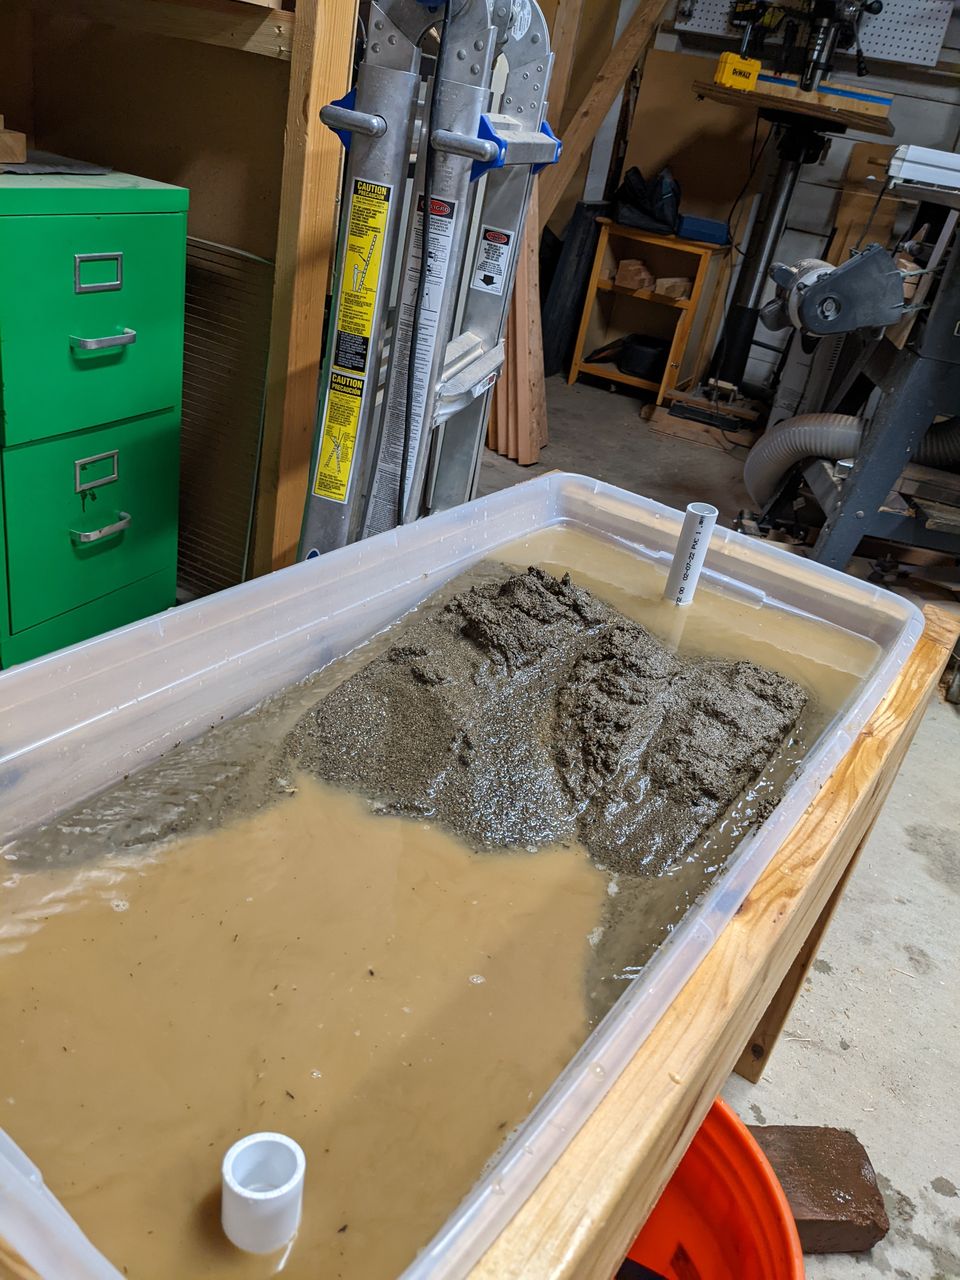 mud table initial testing showing large amount of silty sediment being released